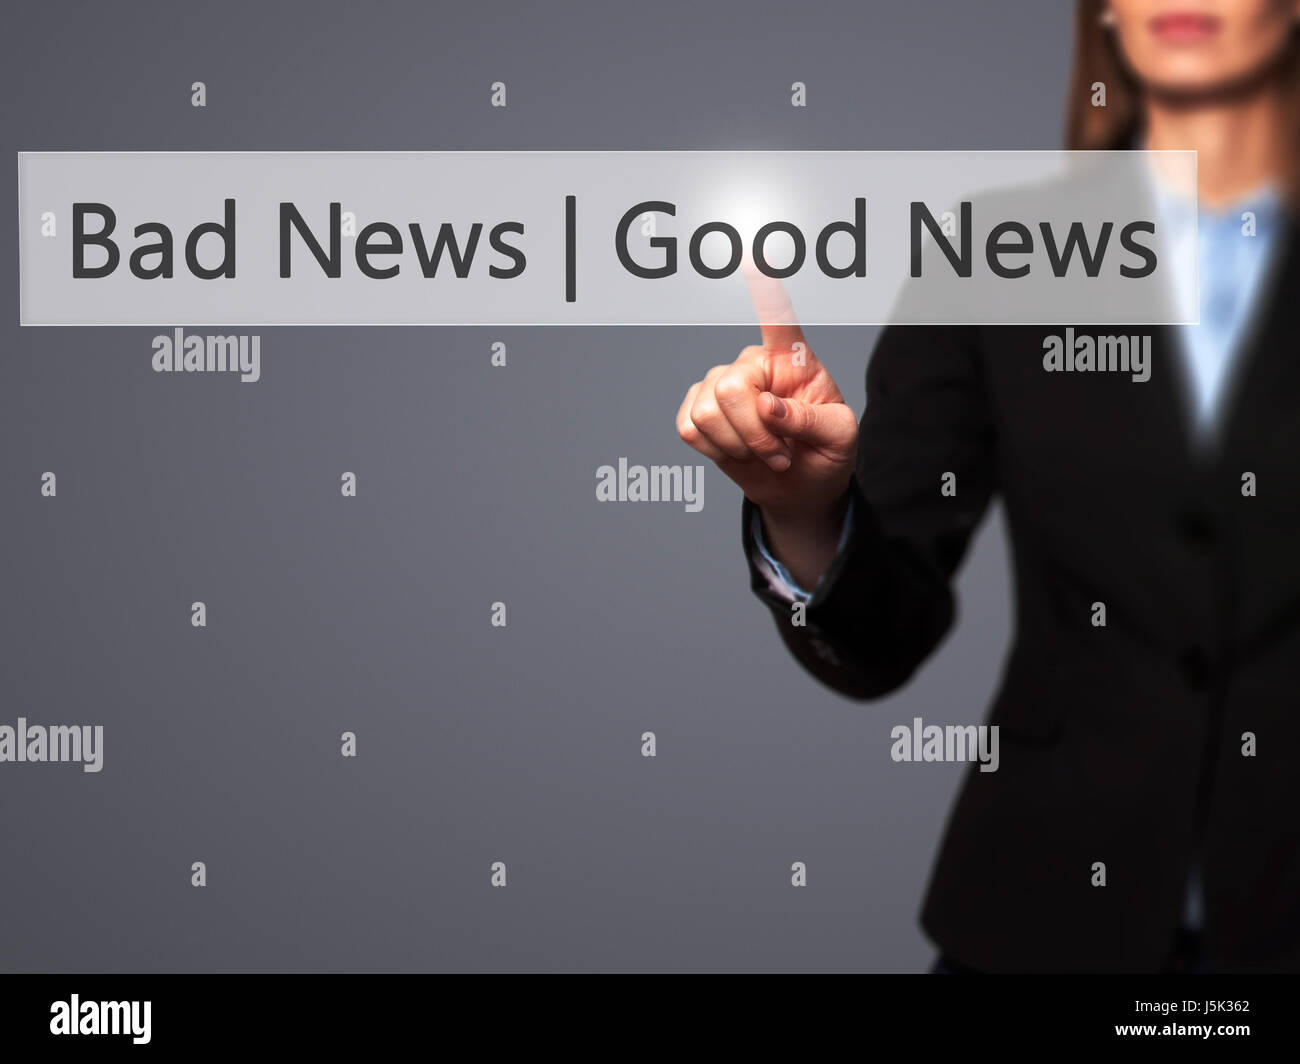 Good News Bad News - Businesswoman hand pressing button on touch screen interface. Business, technology, internet concept. Stock Photo Stock Photo